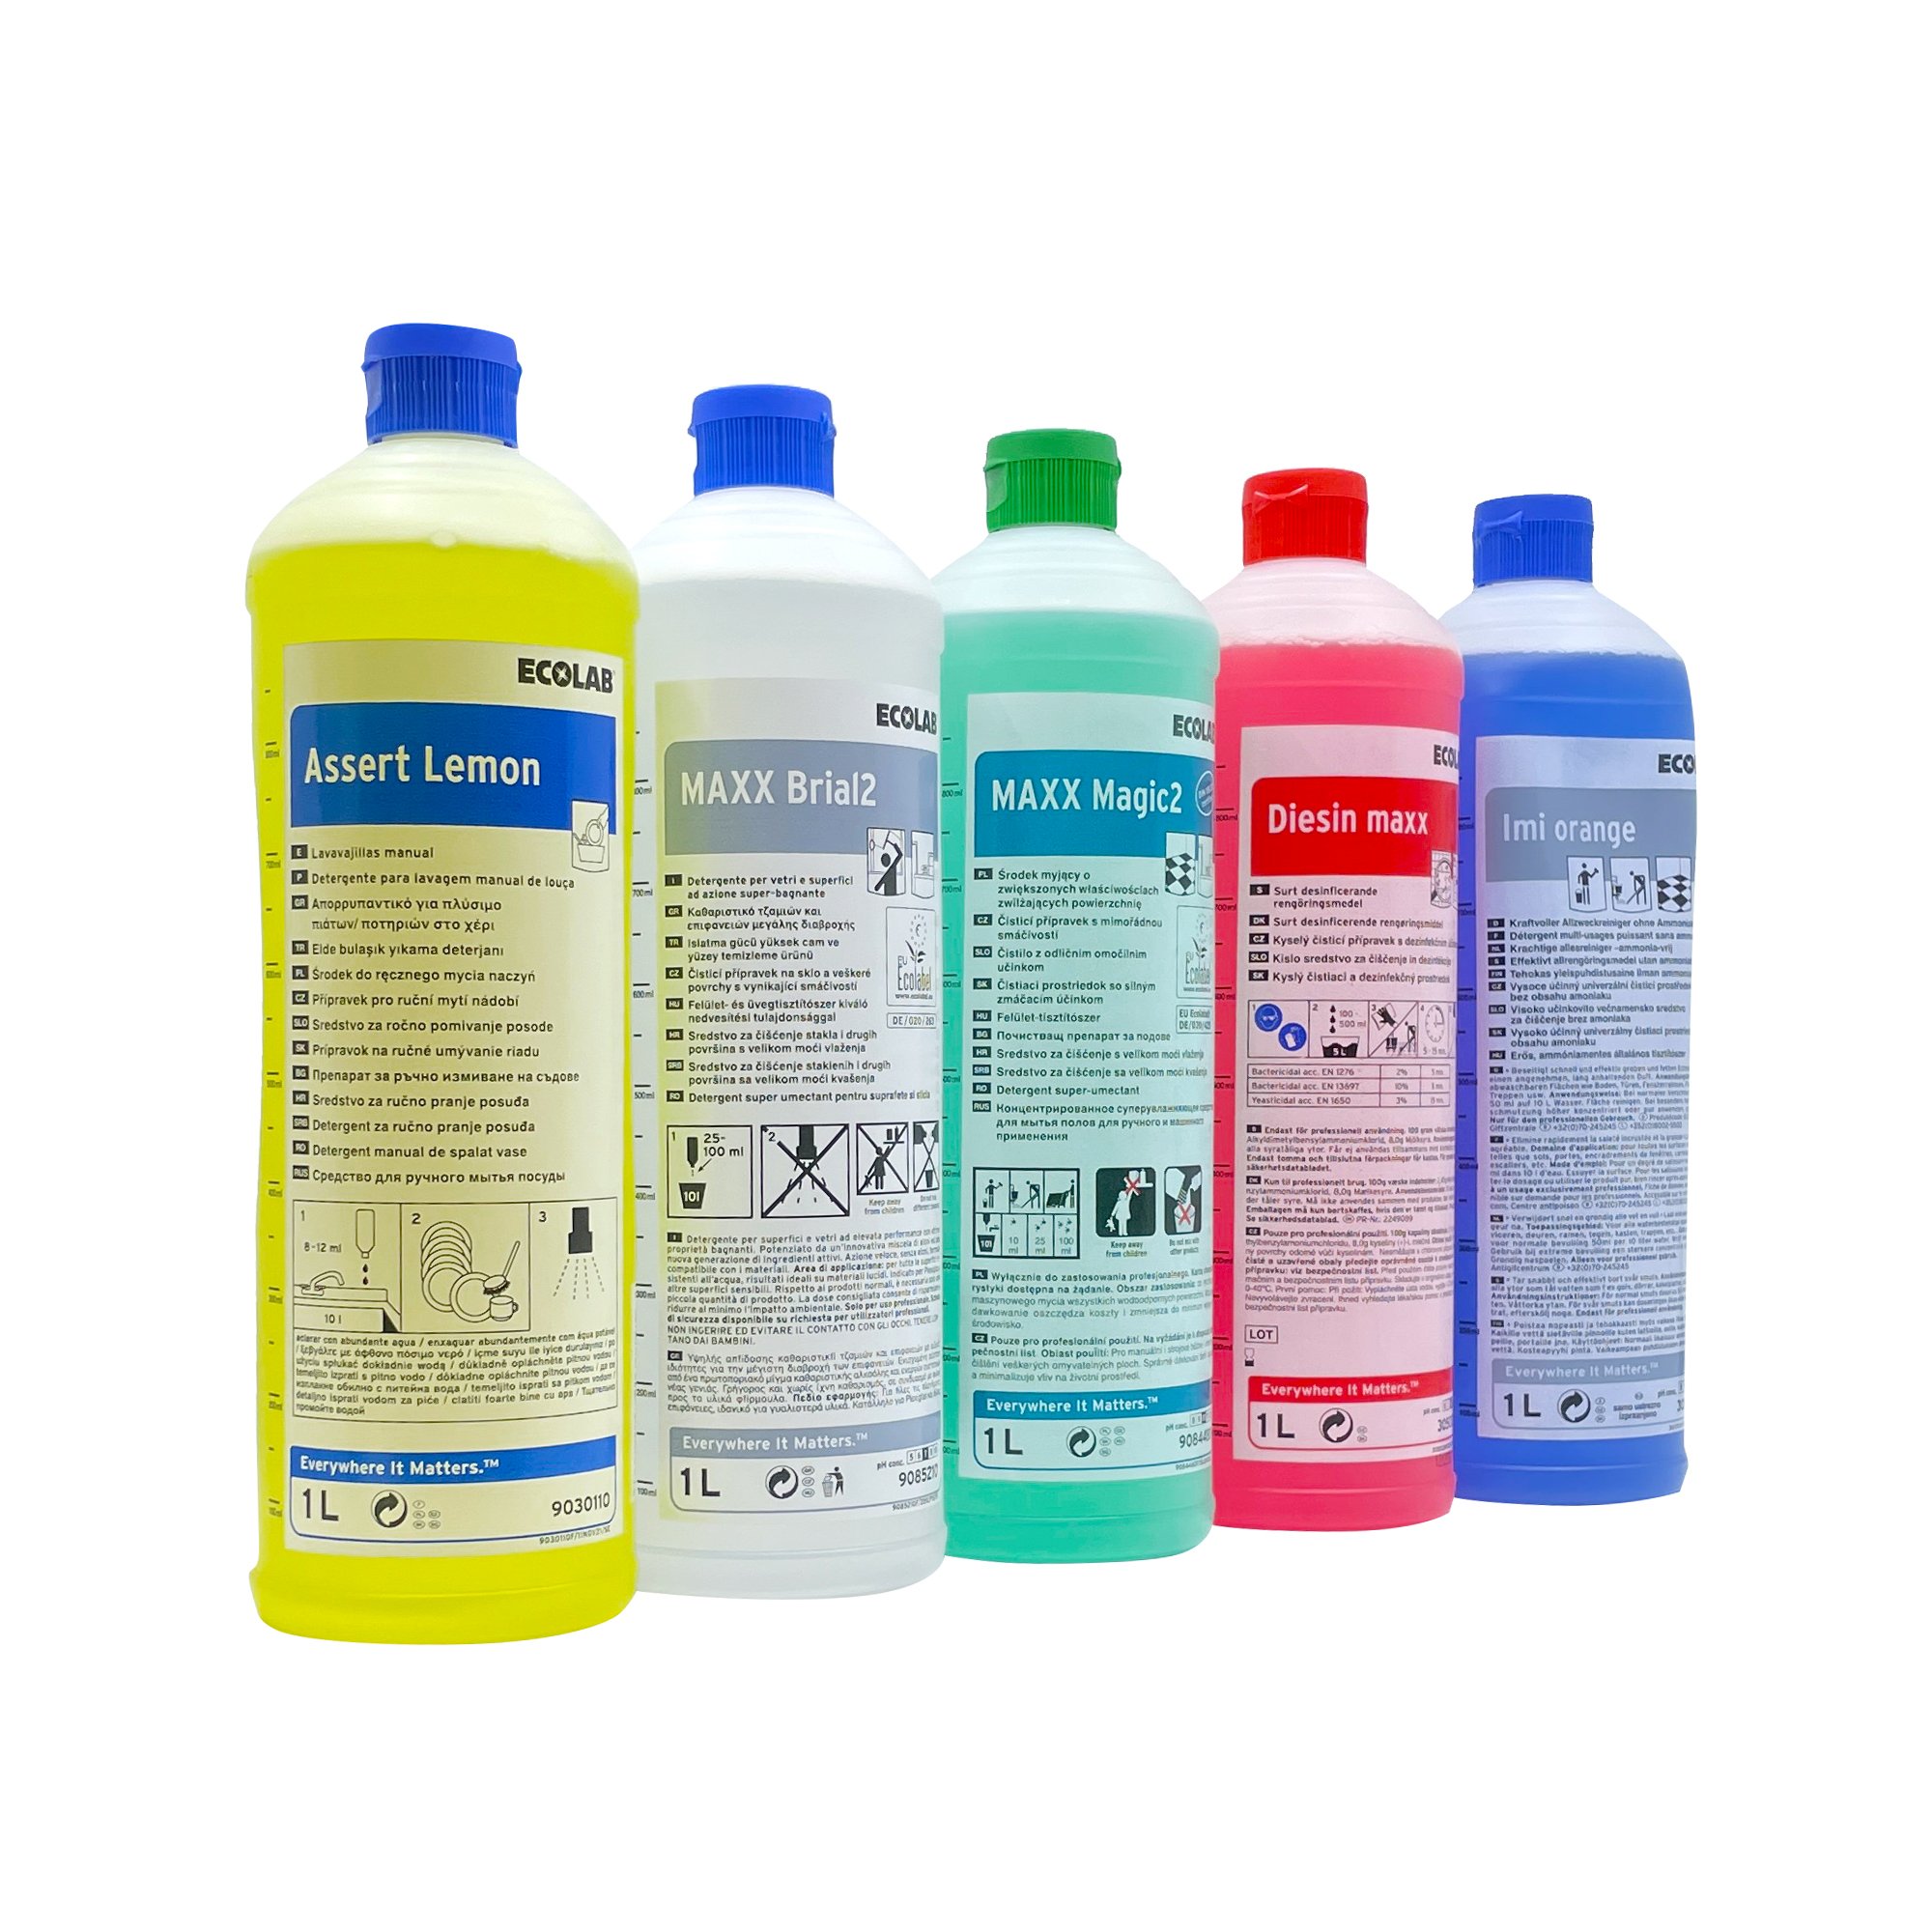 Aniosgel 800 - Disinfection / Cleaning - Health and safety 